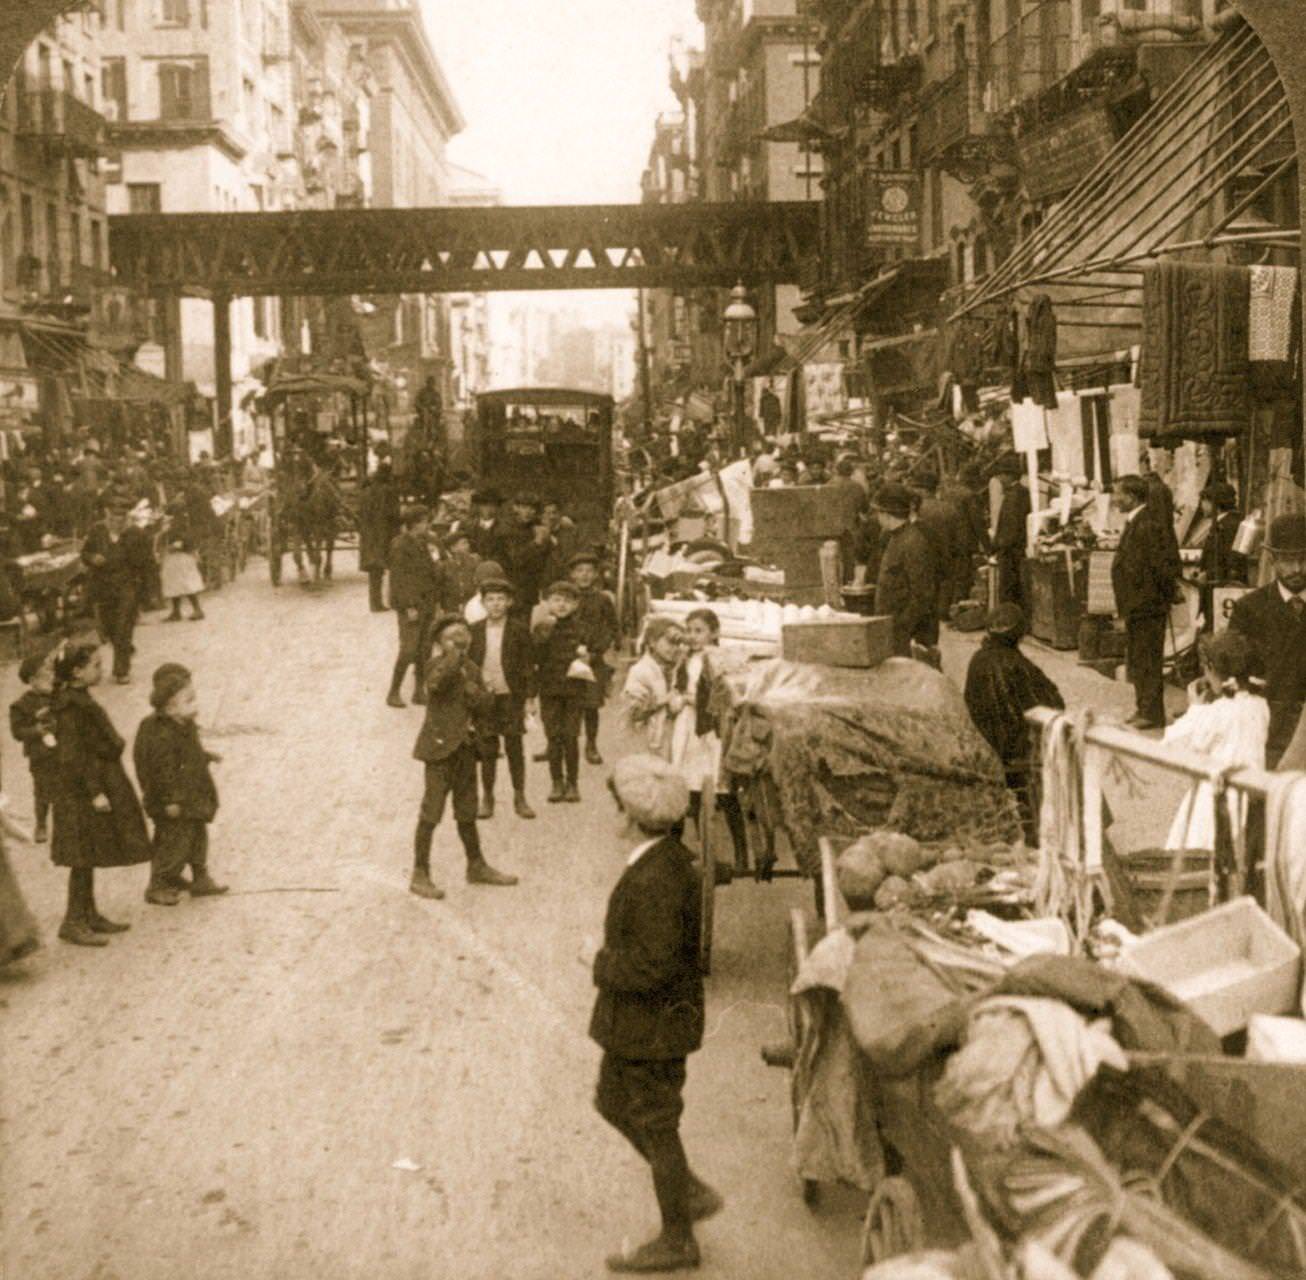 Crowded Hebrew District, Lower East Side, New York City, 1900